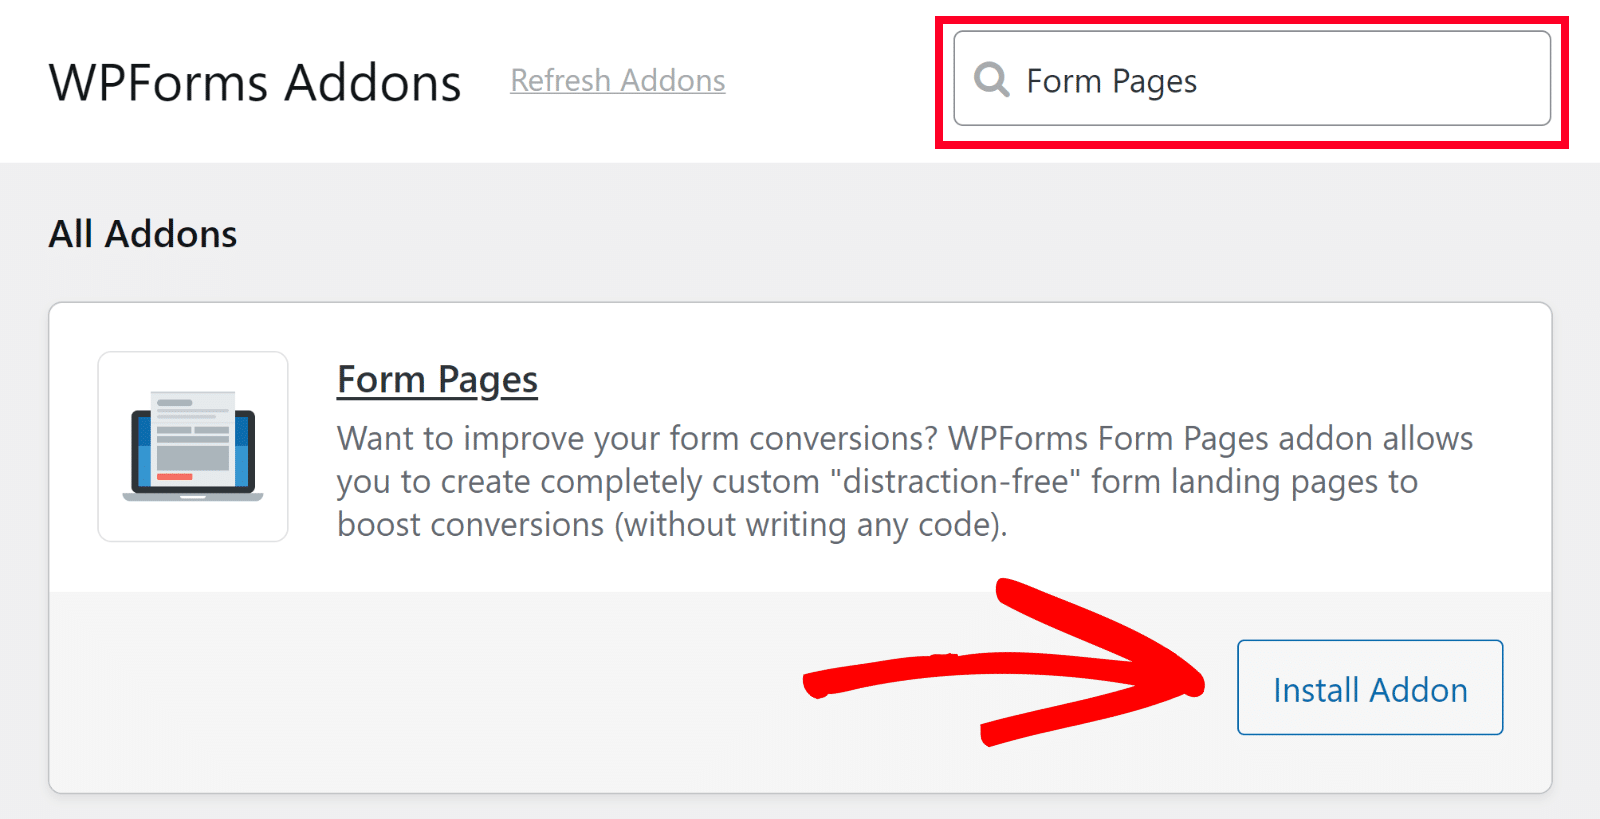 install form pages addon